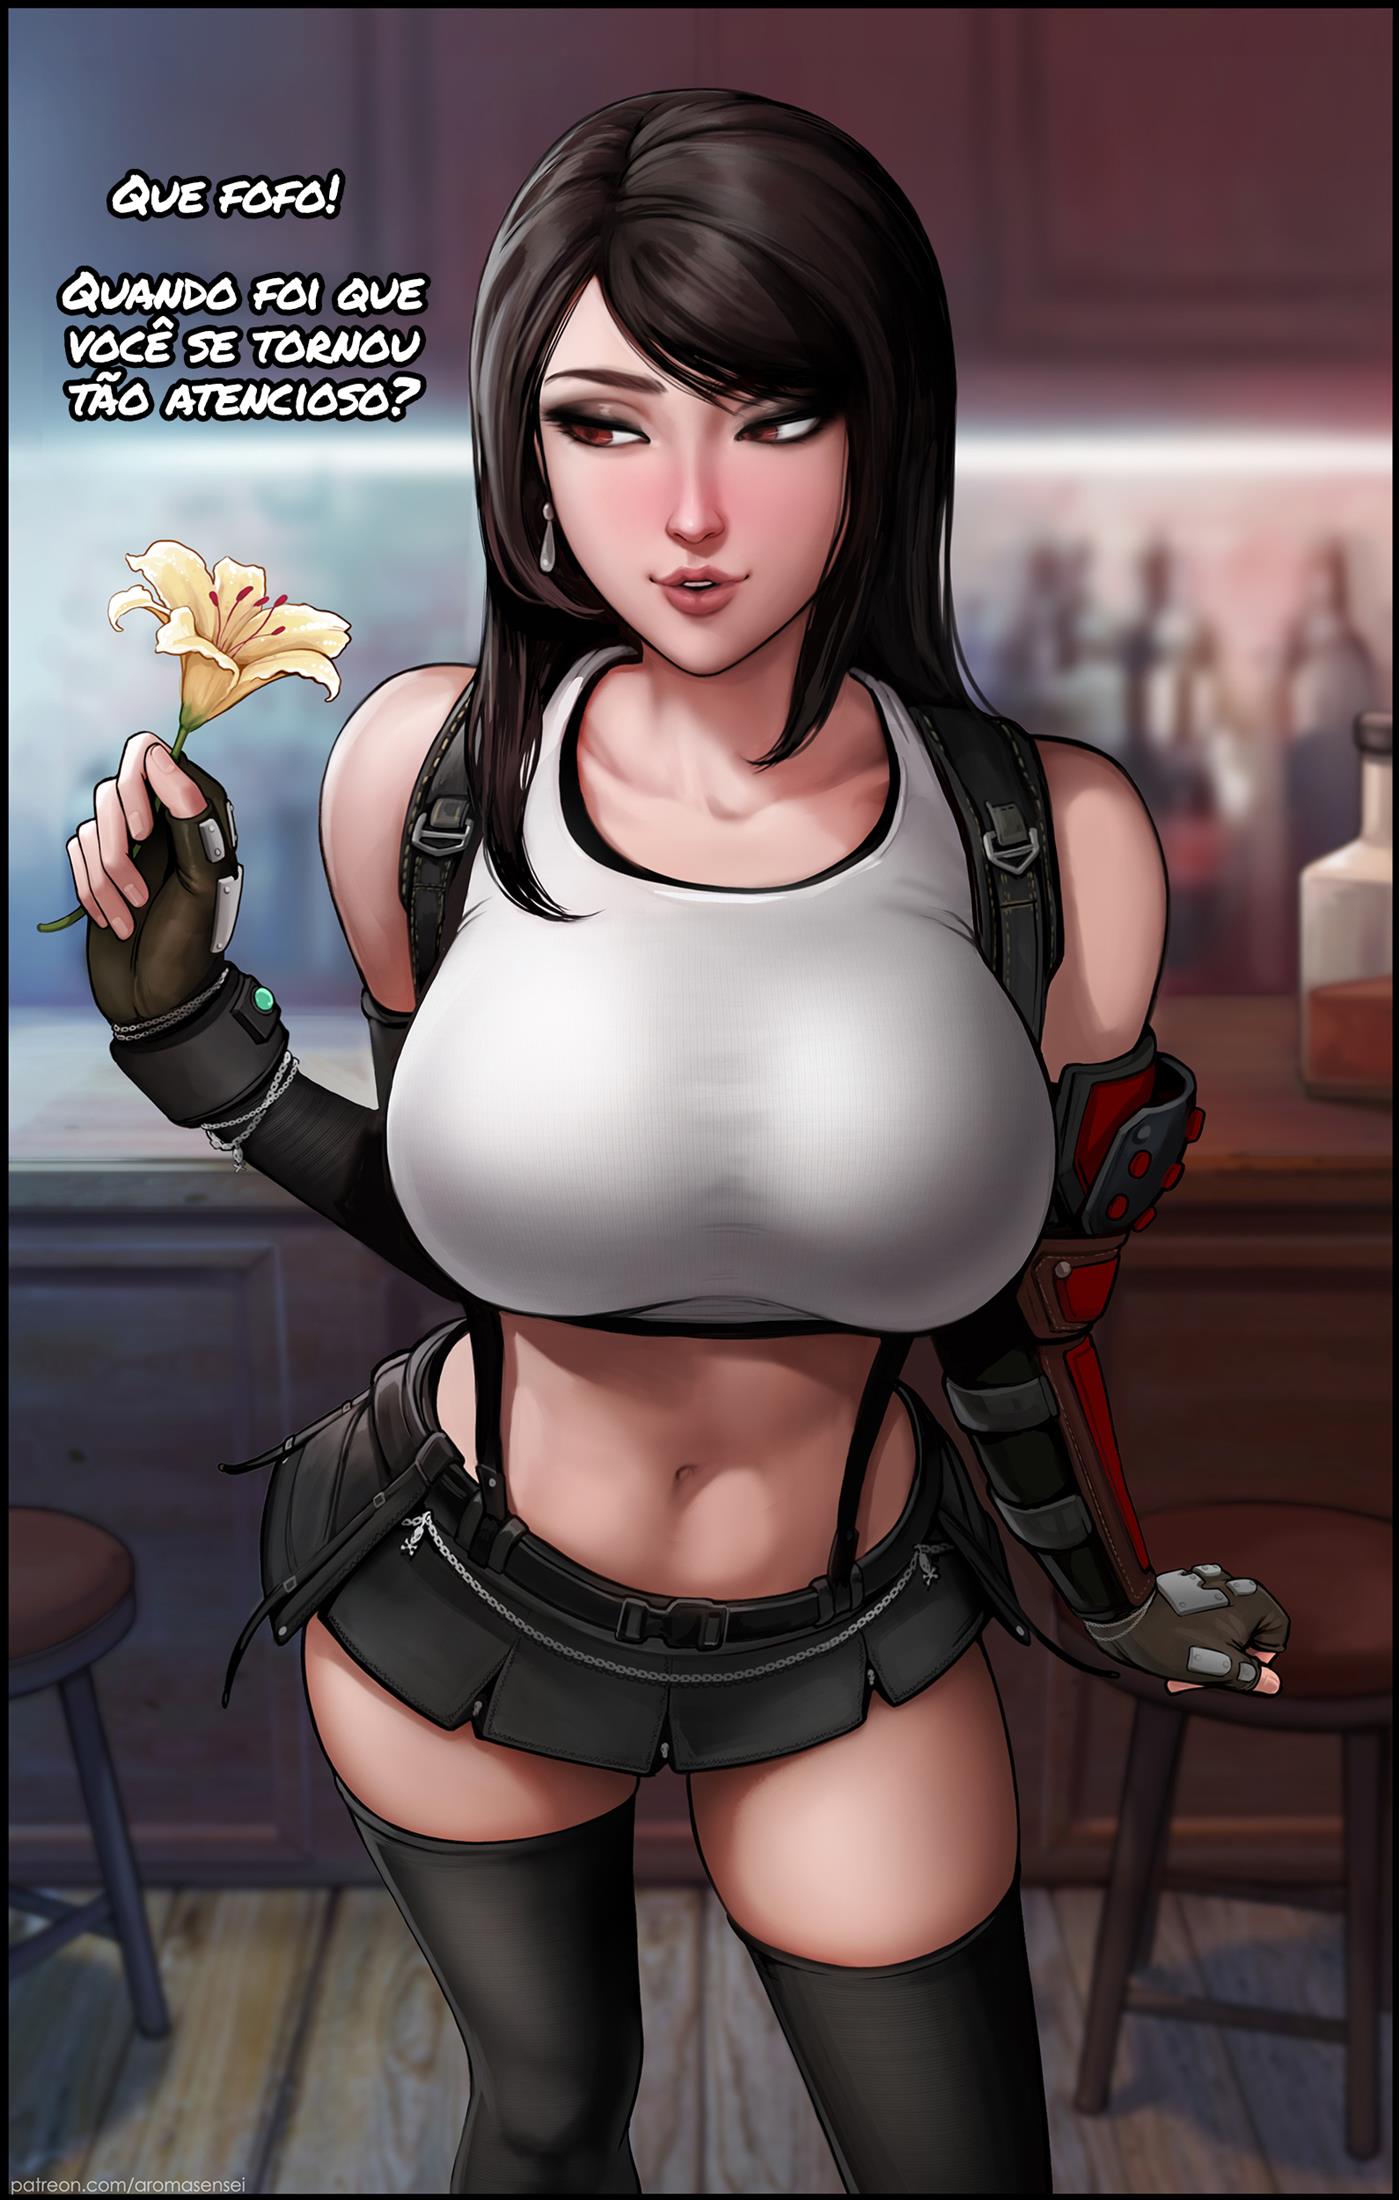 Tifa… its for you!